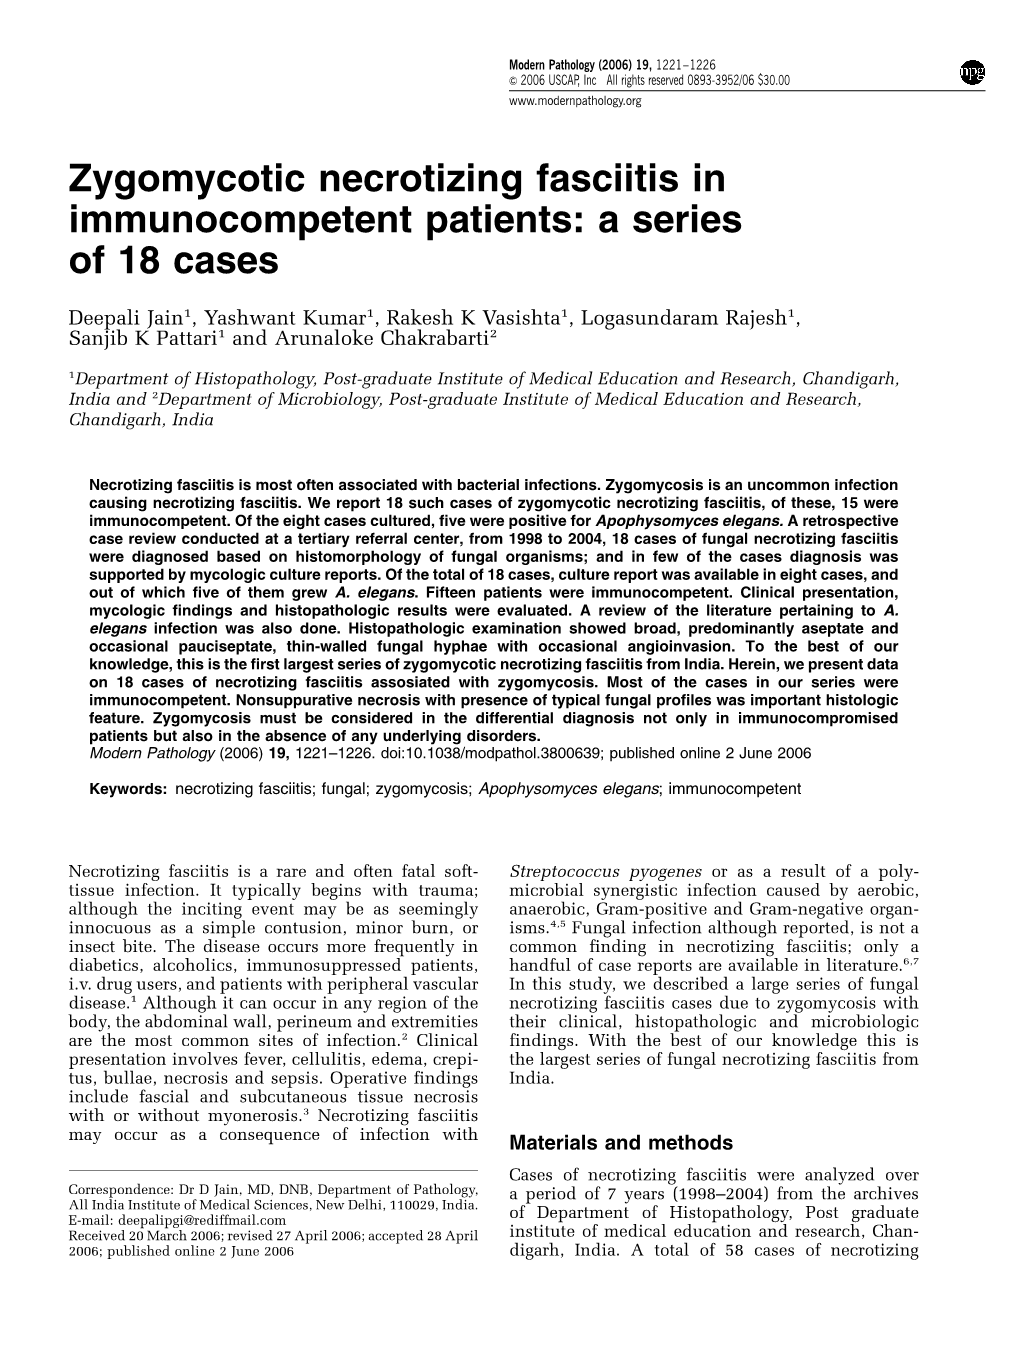 Zygomycotic Necrotizing Fasciitis in Immunocompetent Patients: a Series of 18 Cases